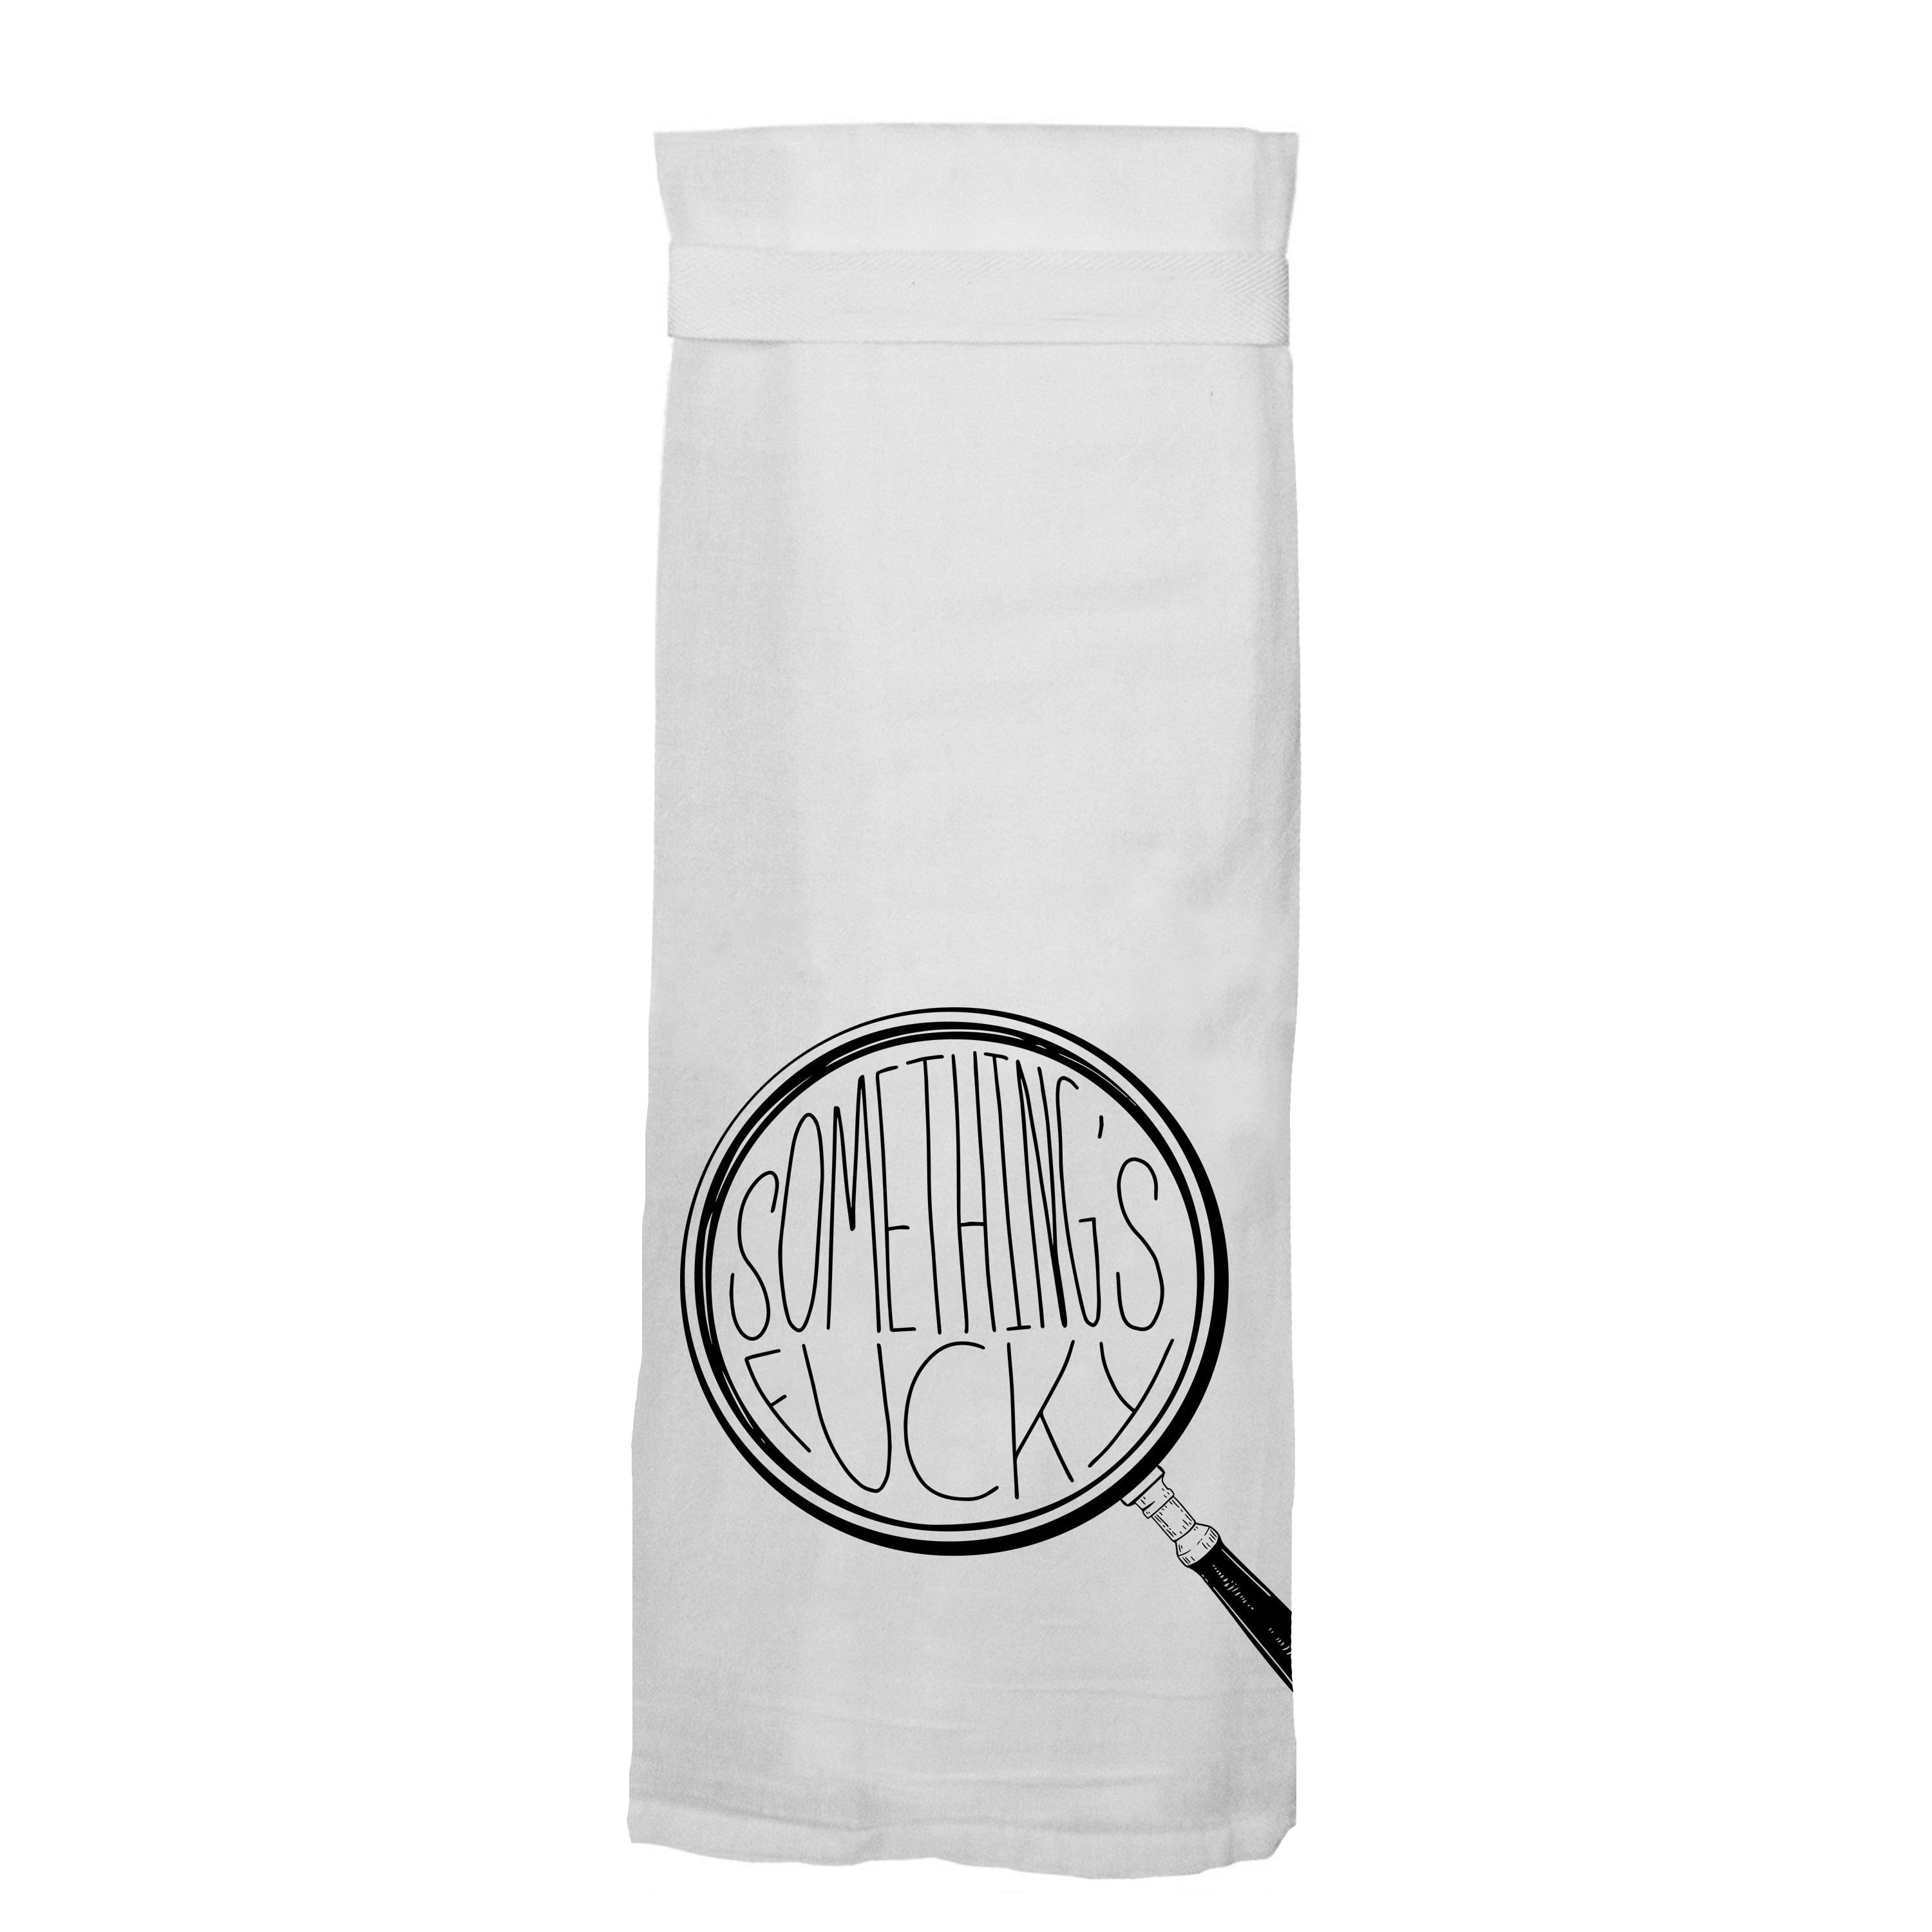 Something's Fucky Flour Sack Hang Tight Towel - Twisted Wares®